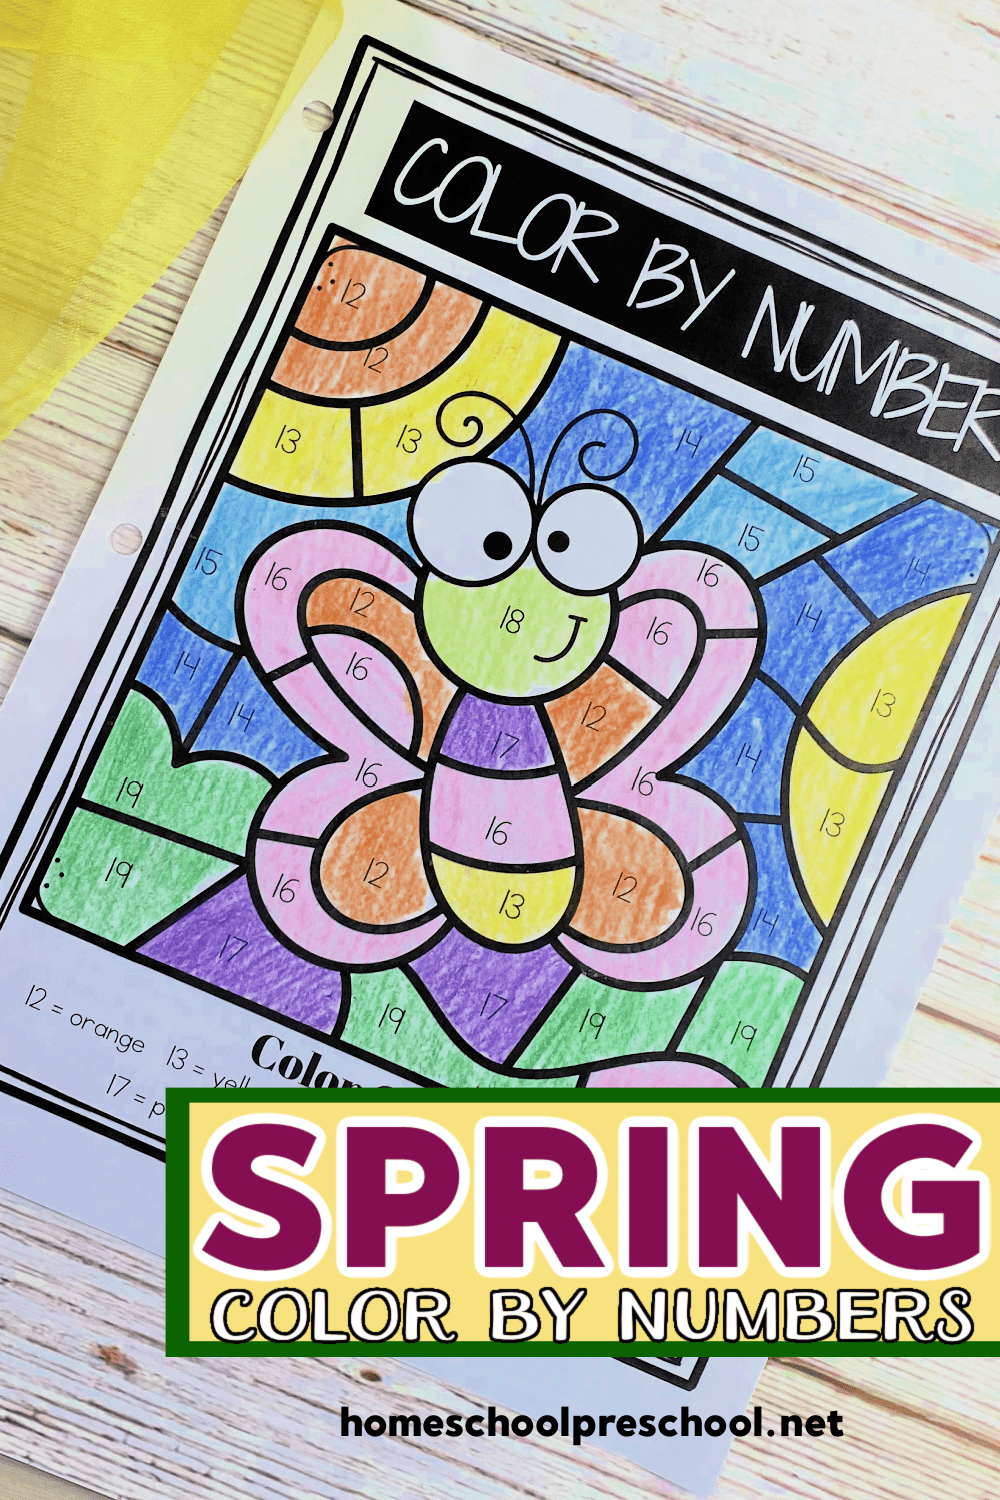 Free spring color by number printables for preschoolers